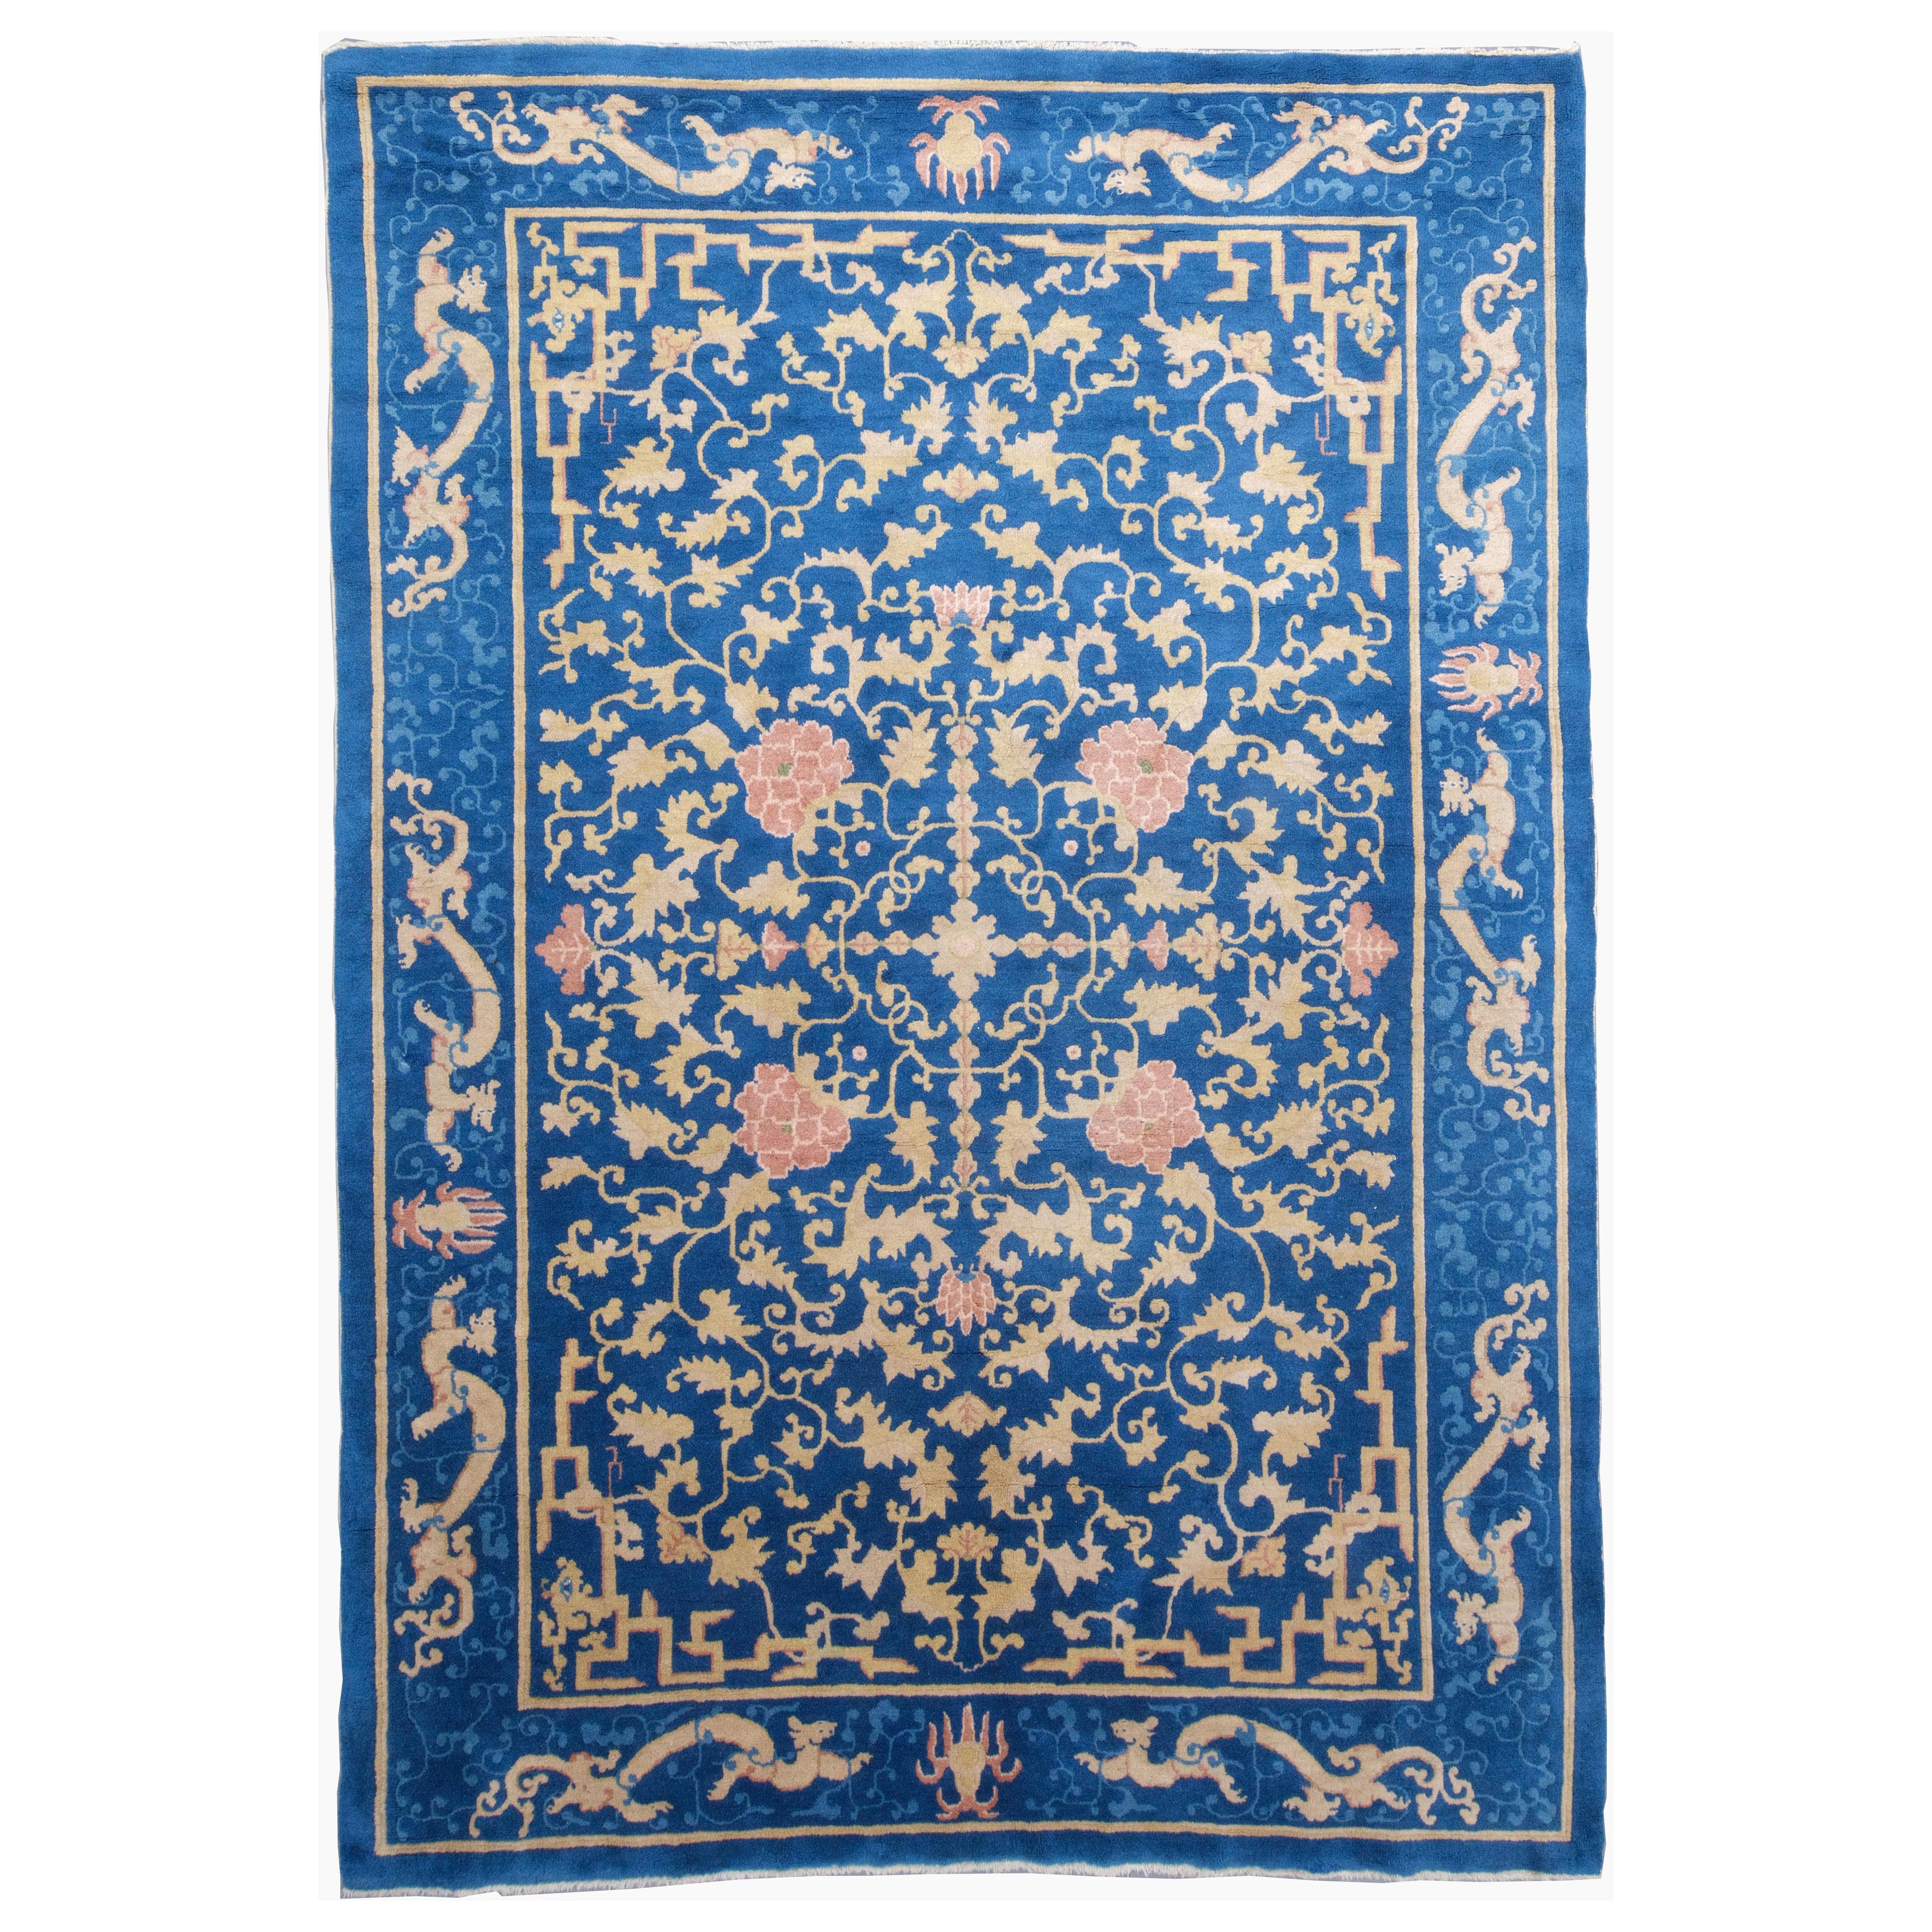 Antique Chinese Carpet - Handmade Natural Colors For Sale